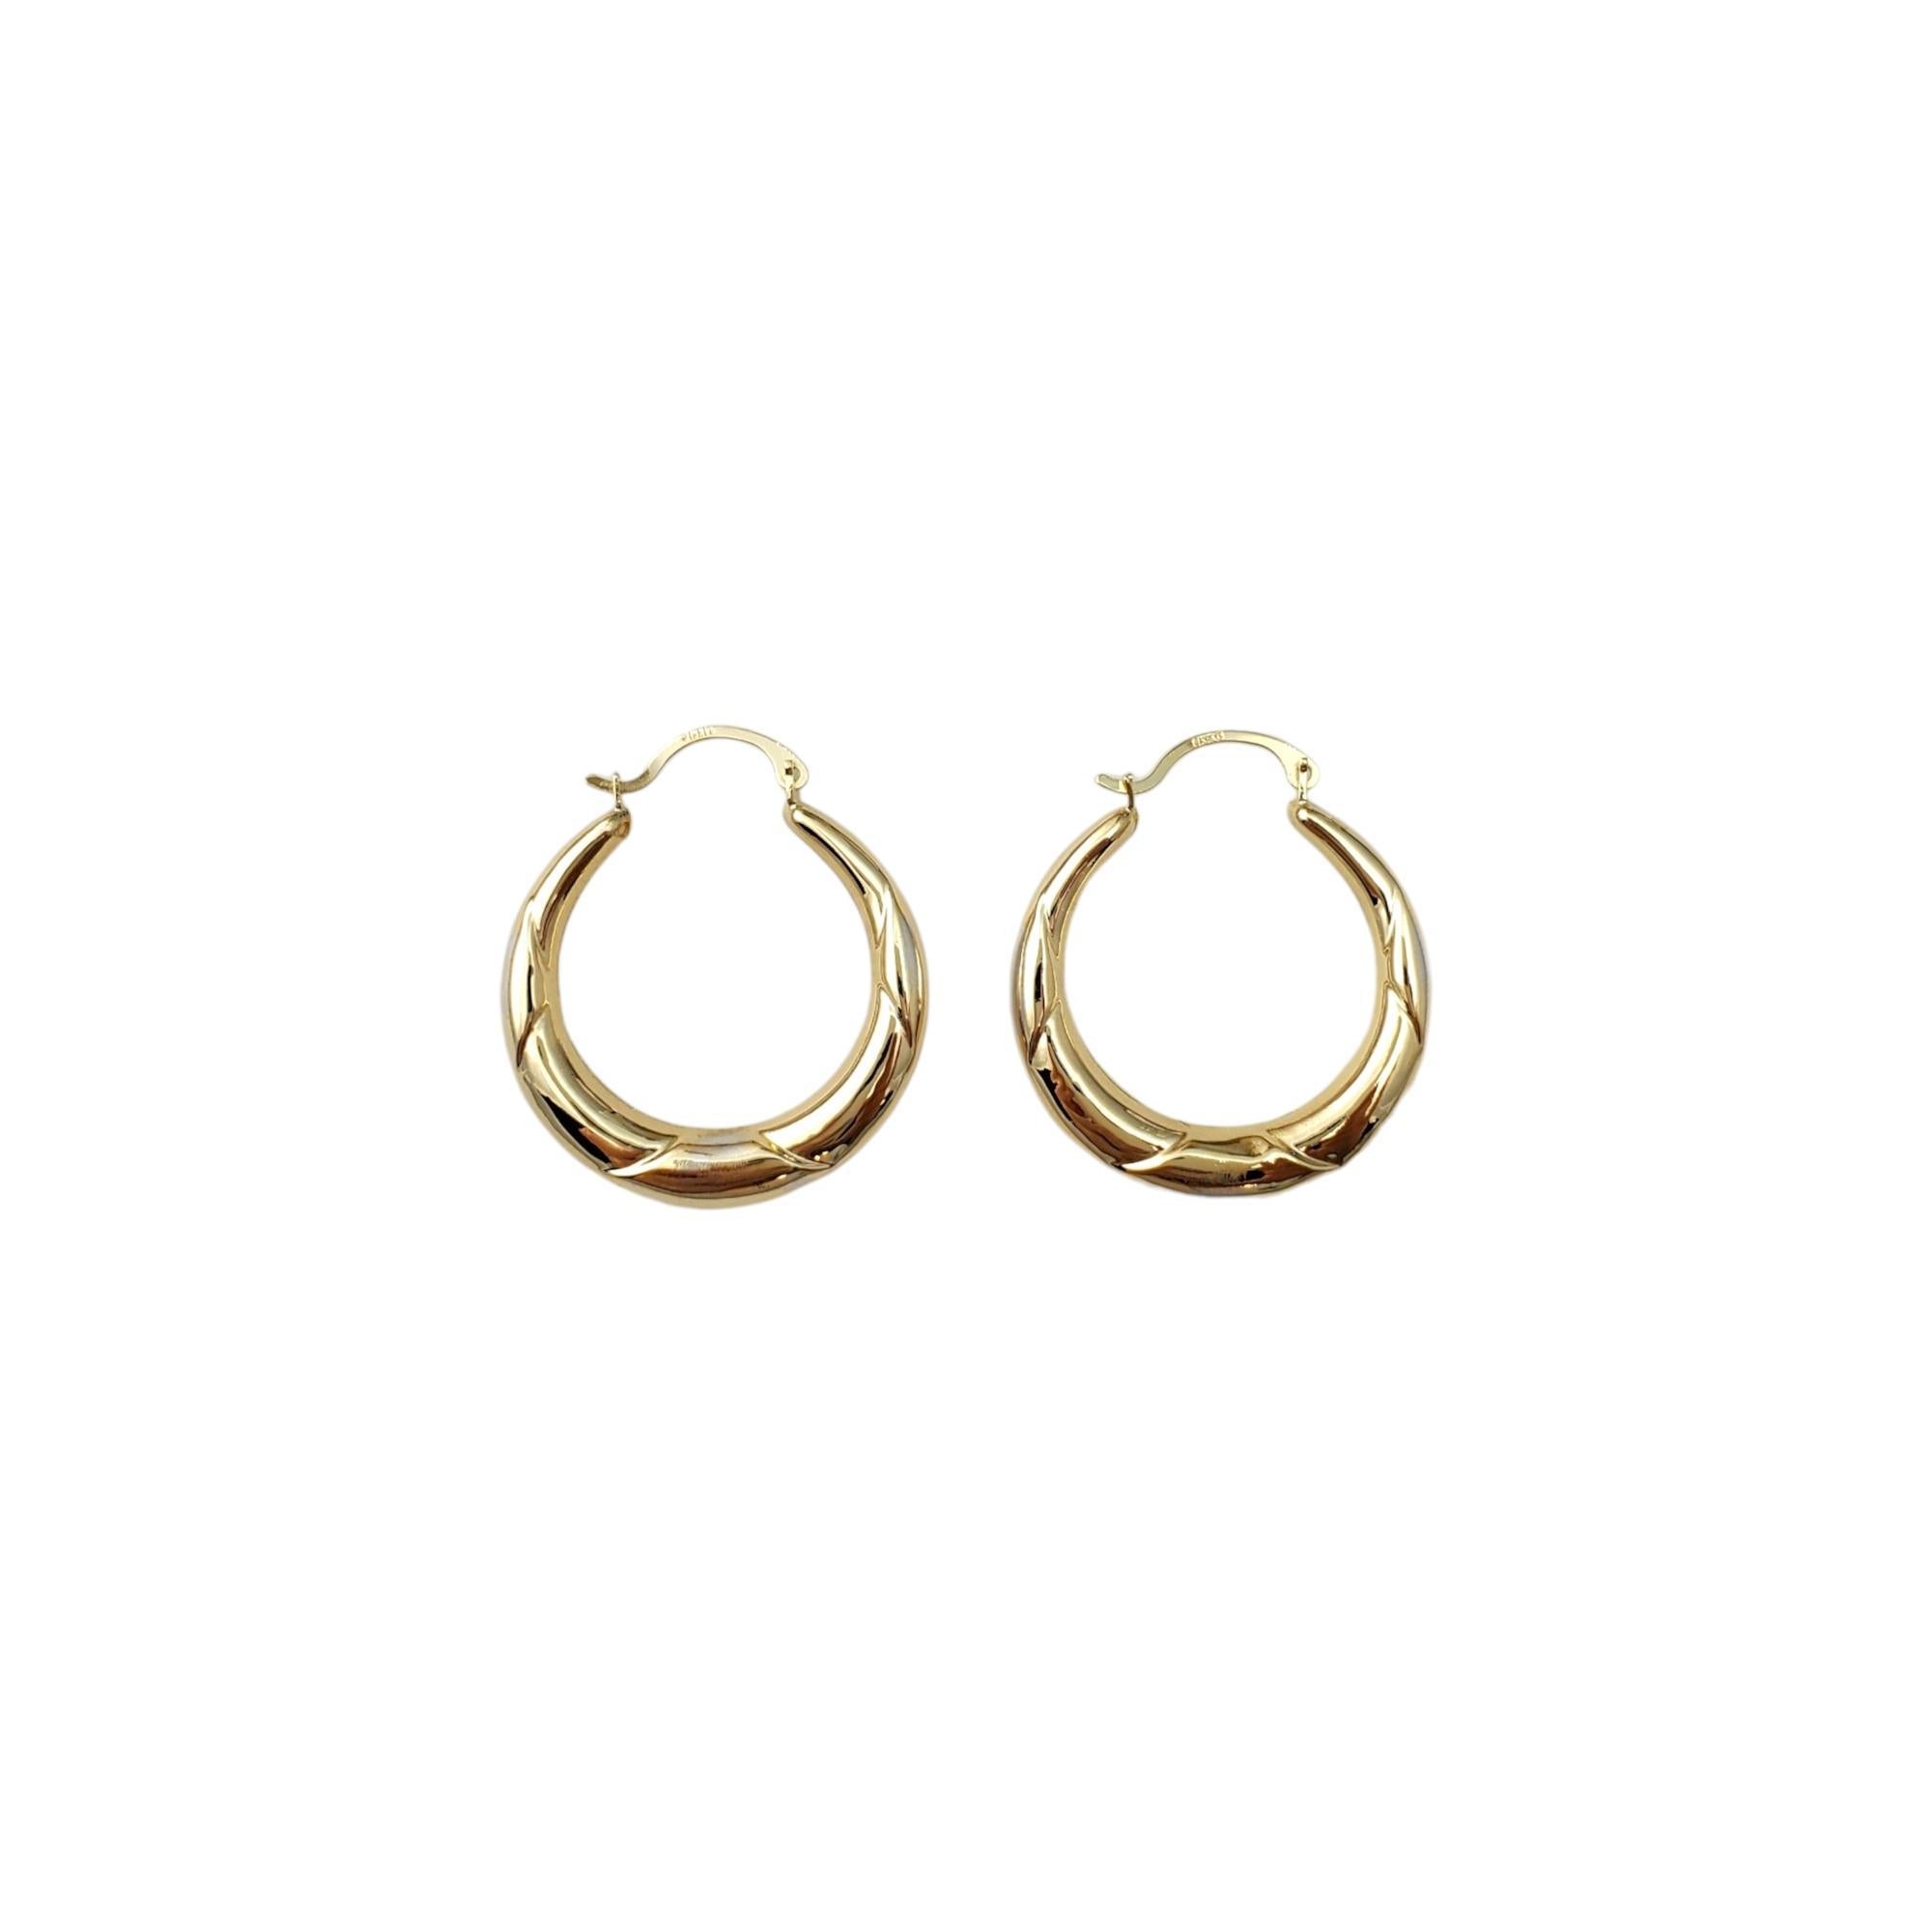 Vintage 14K Yellow Gold Hoop Earrings -

These classic hoop earrings are a stunning addition to your collection. Etched design on hoops

Size:  30.7 mm X 4.0mm x 4.3 mm

These earrings hang approx. 1 1/4